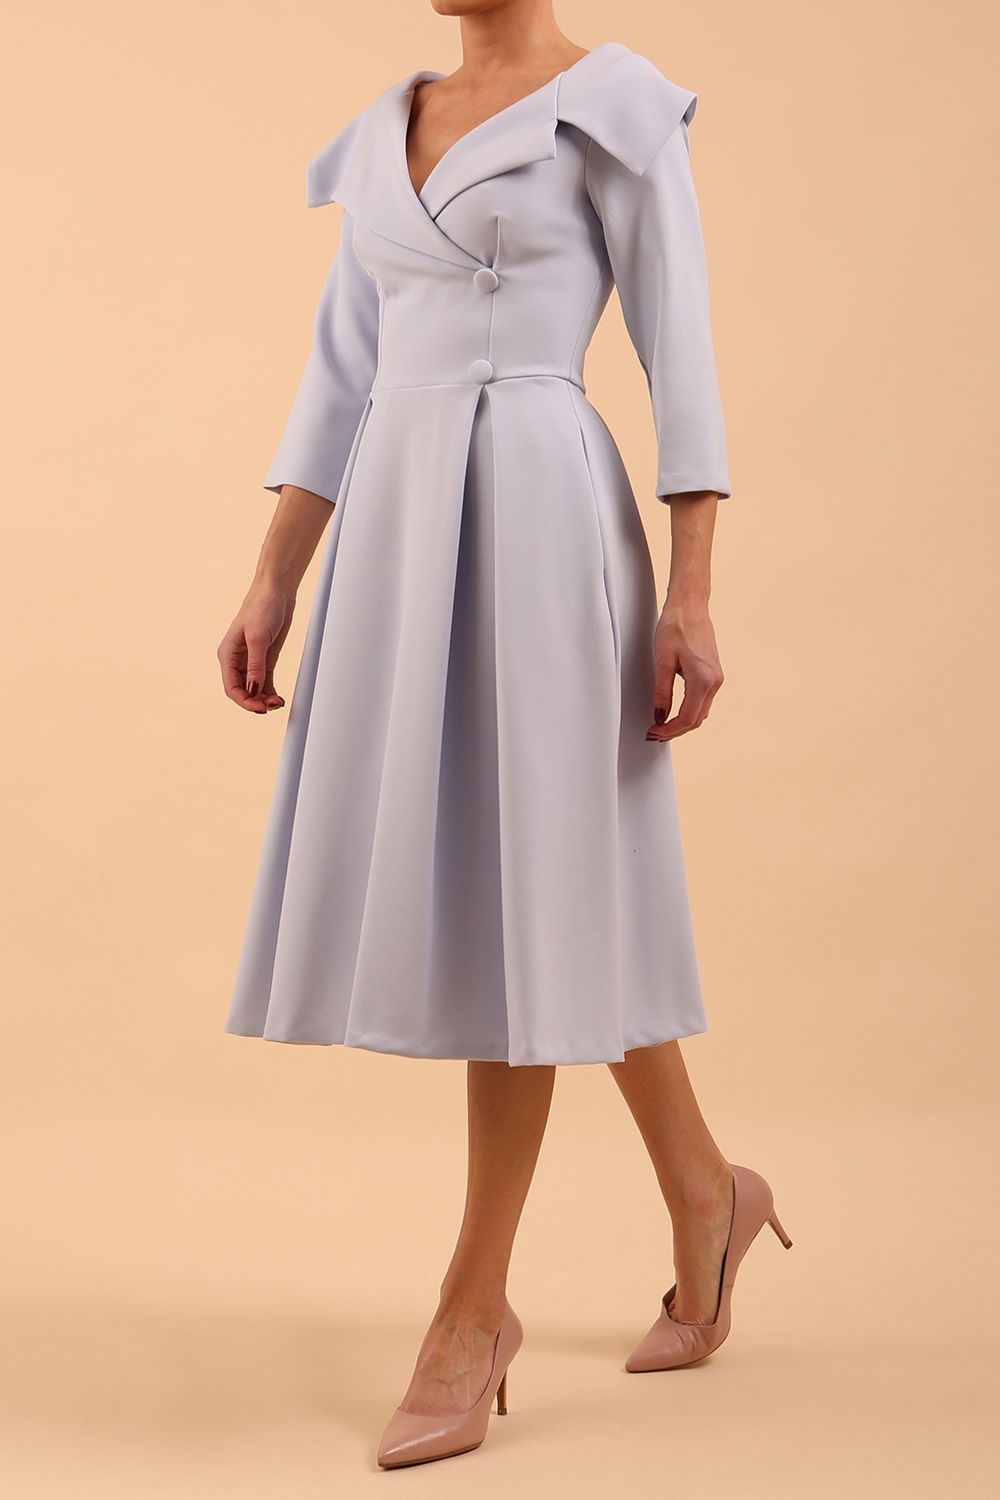 model is wearing diva catwalk gatsby swing dress with pocket detail and wide v-neck collar and buttons down the front panel in celestial blue front